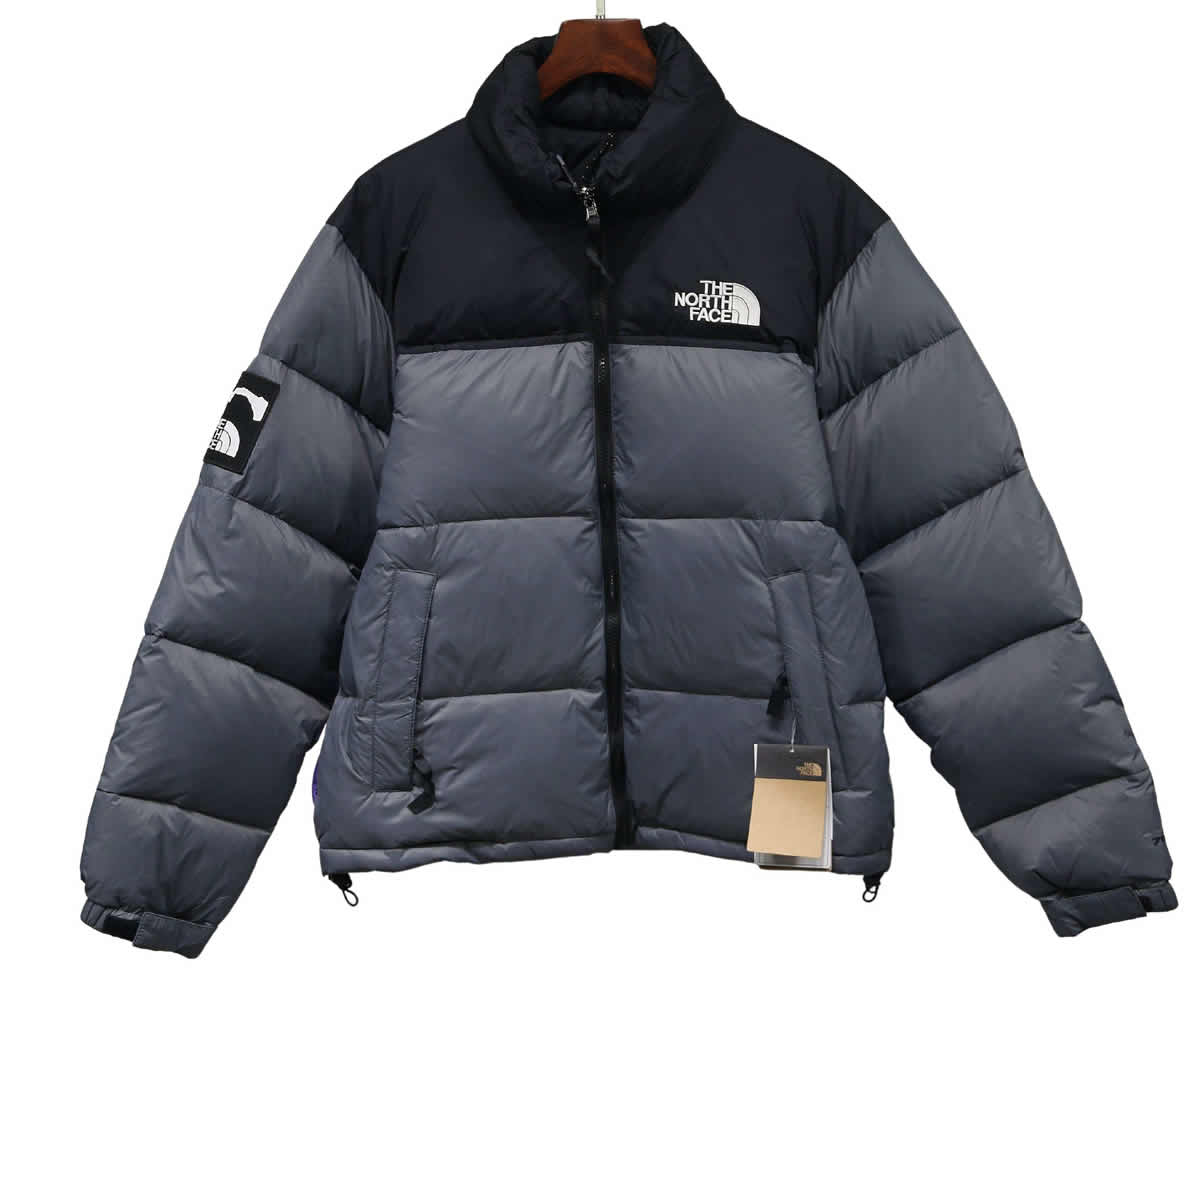 Invincible The North Face Down Jacket 1 - www.kickbulk.co